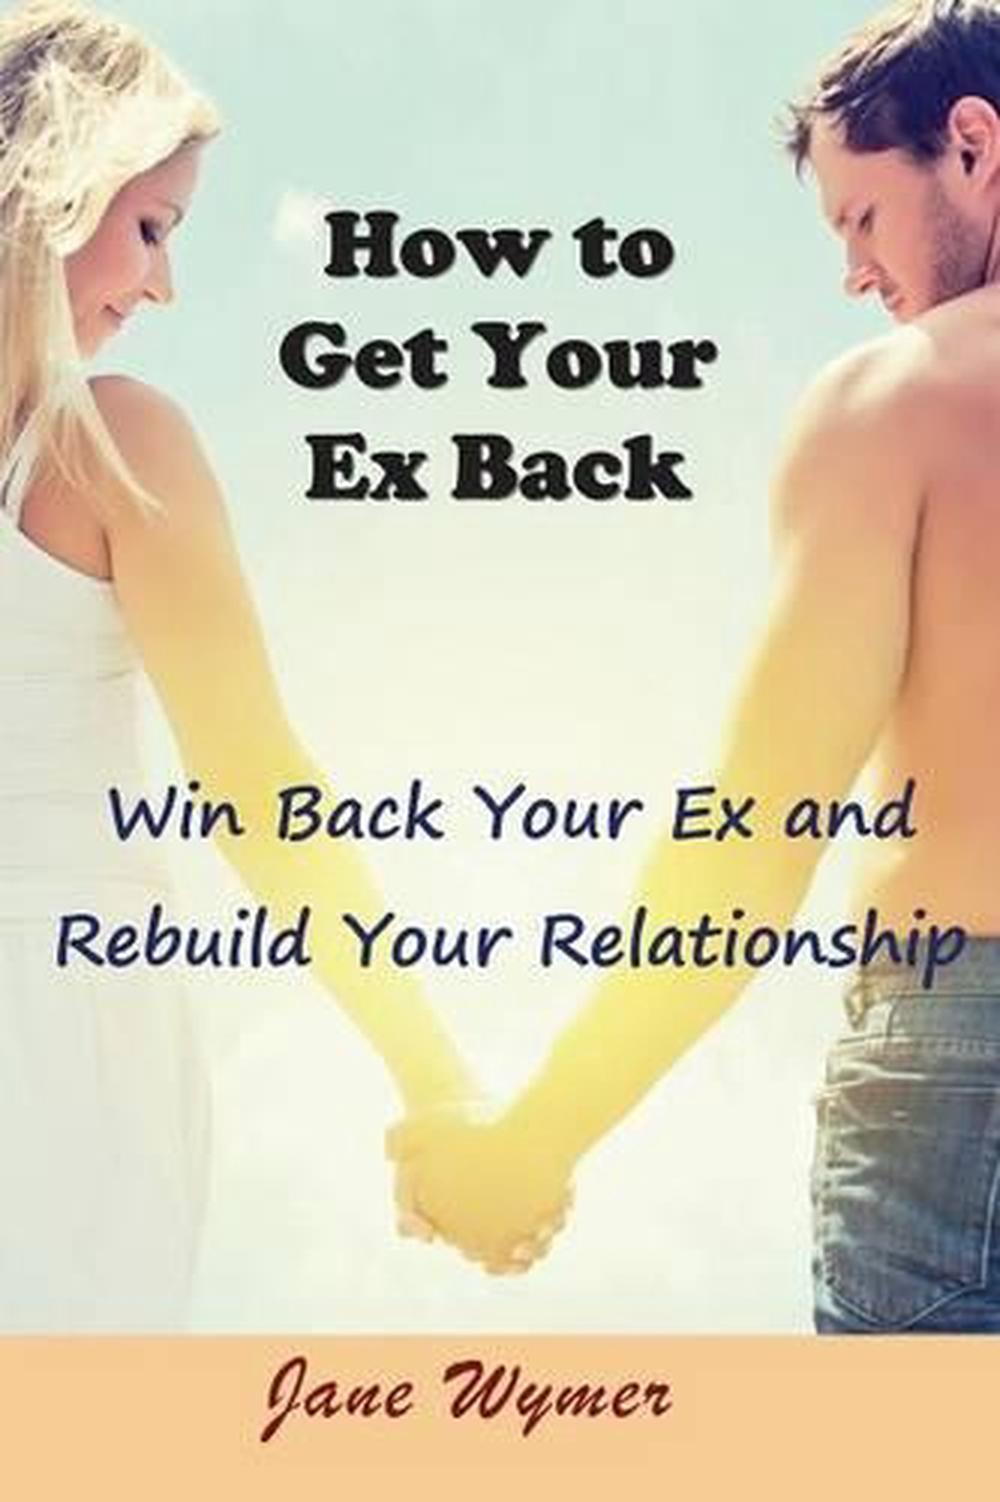 How to Get Your Ex Back Win Back Your Ex and Rebuild Your